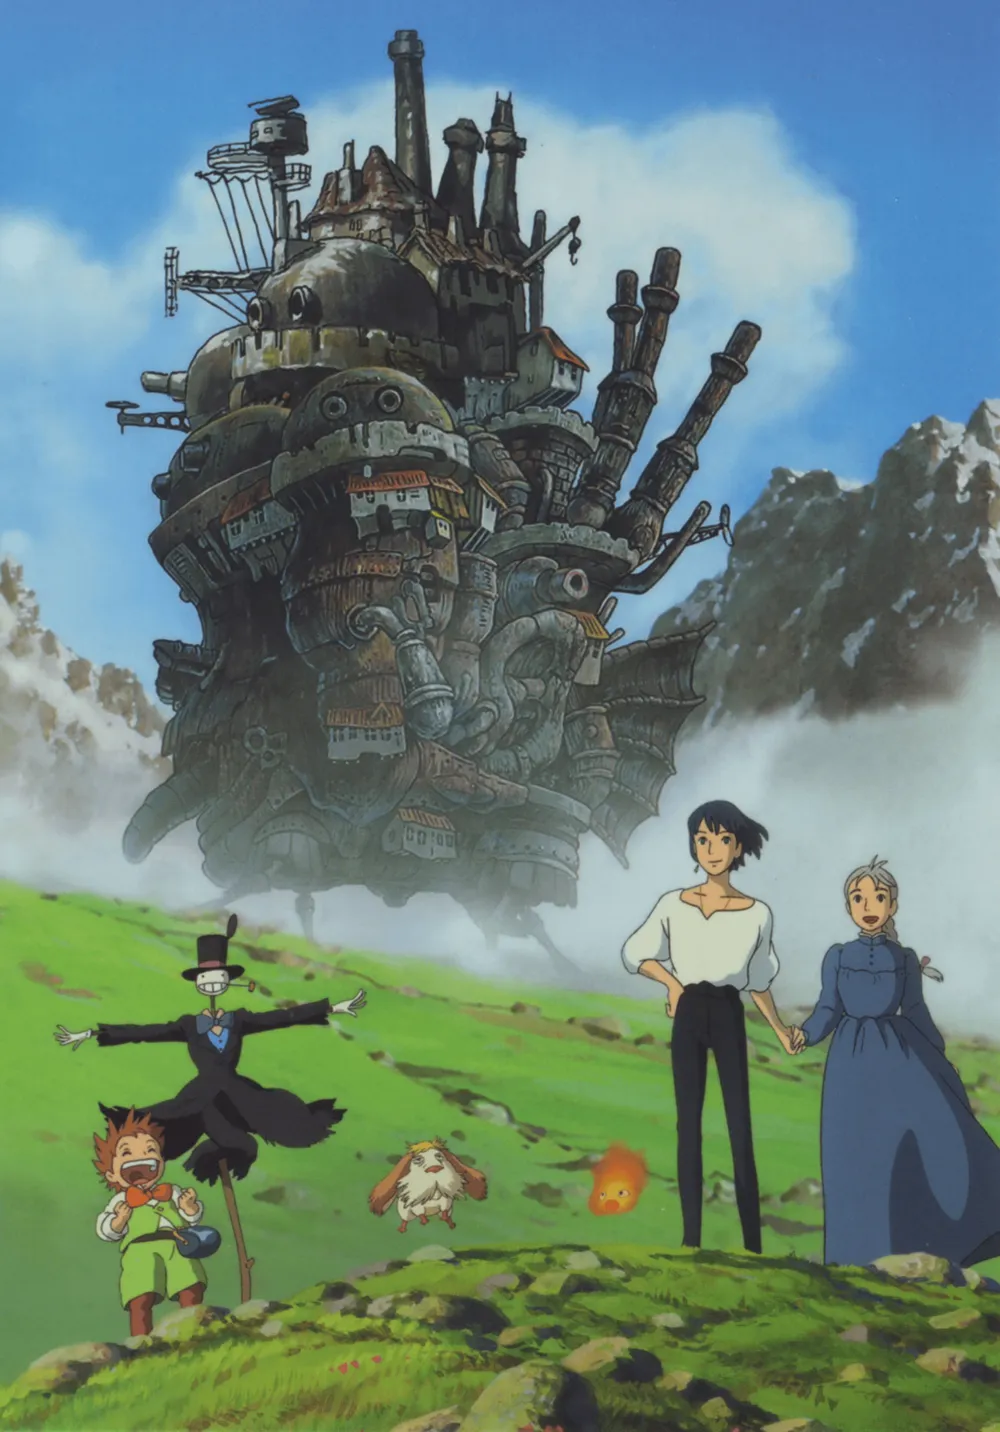 how old is howl in howl's moving castle